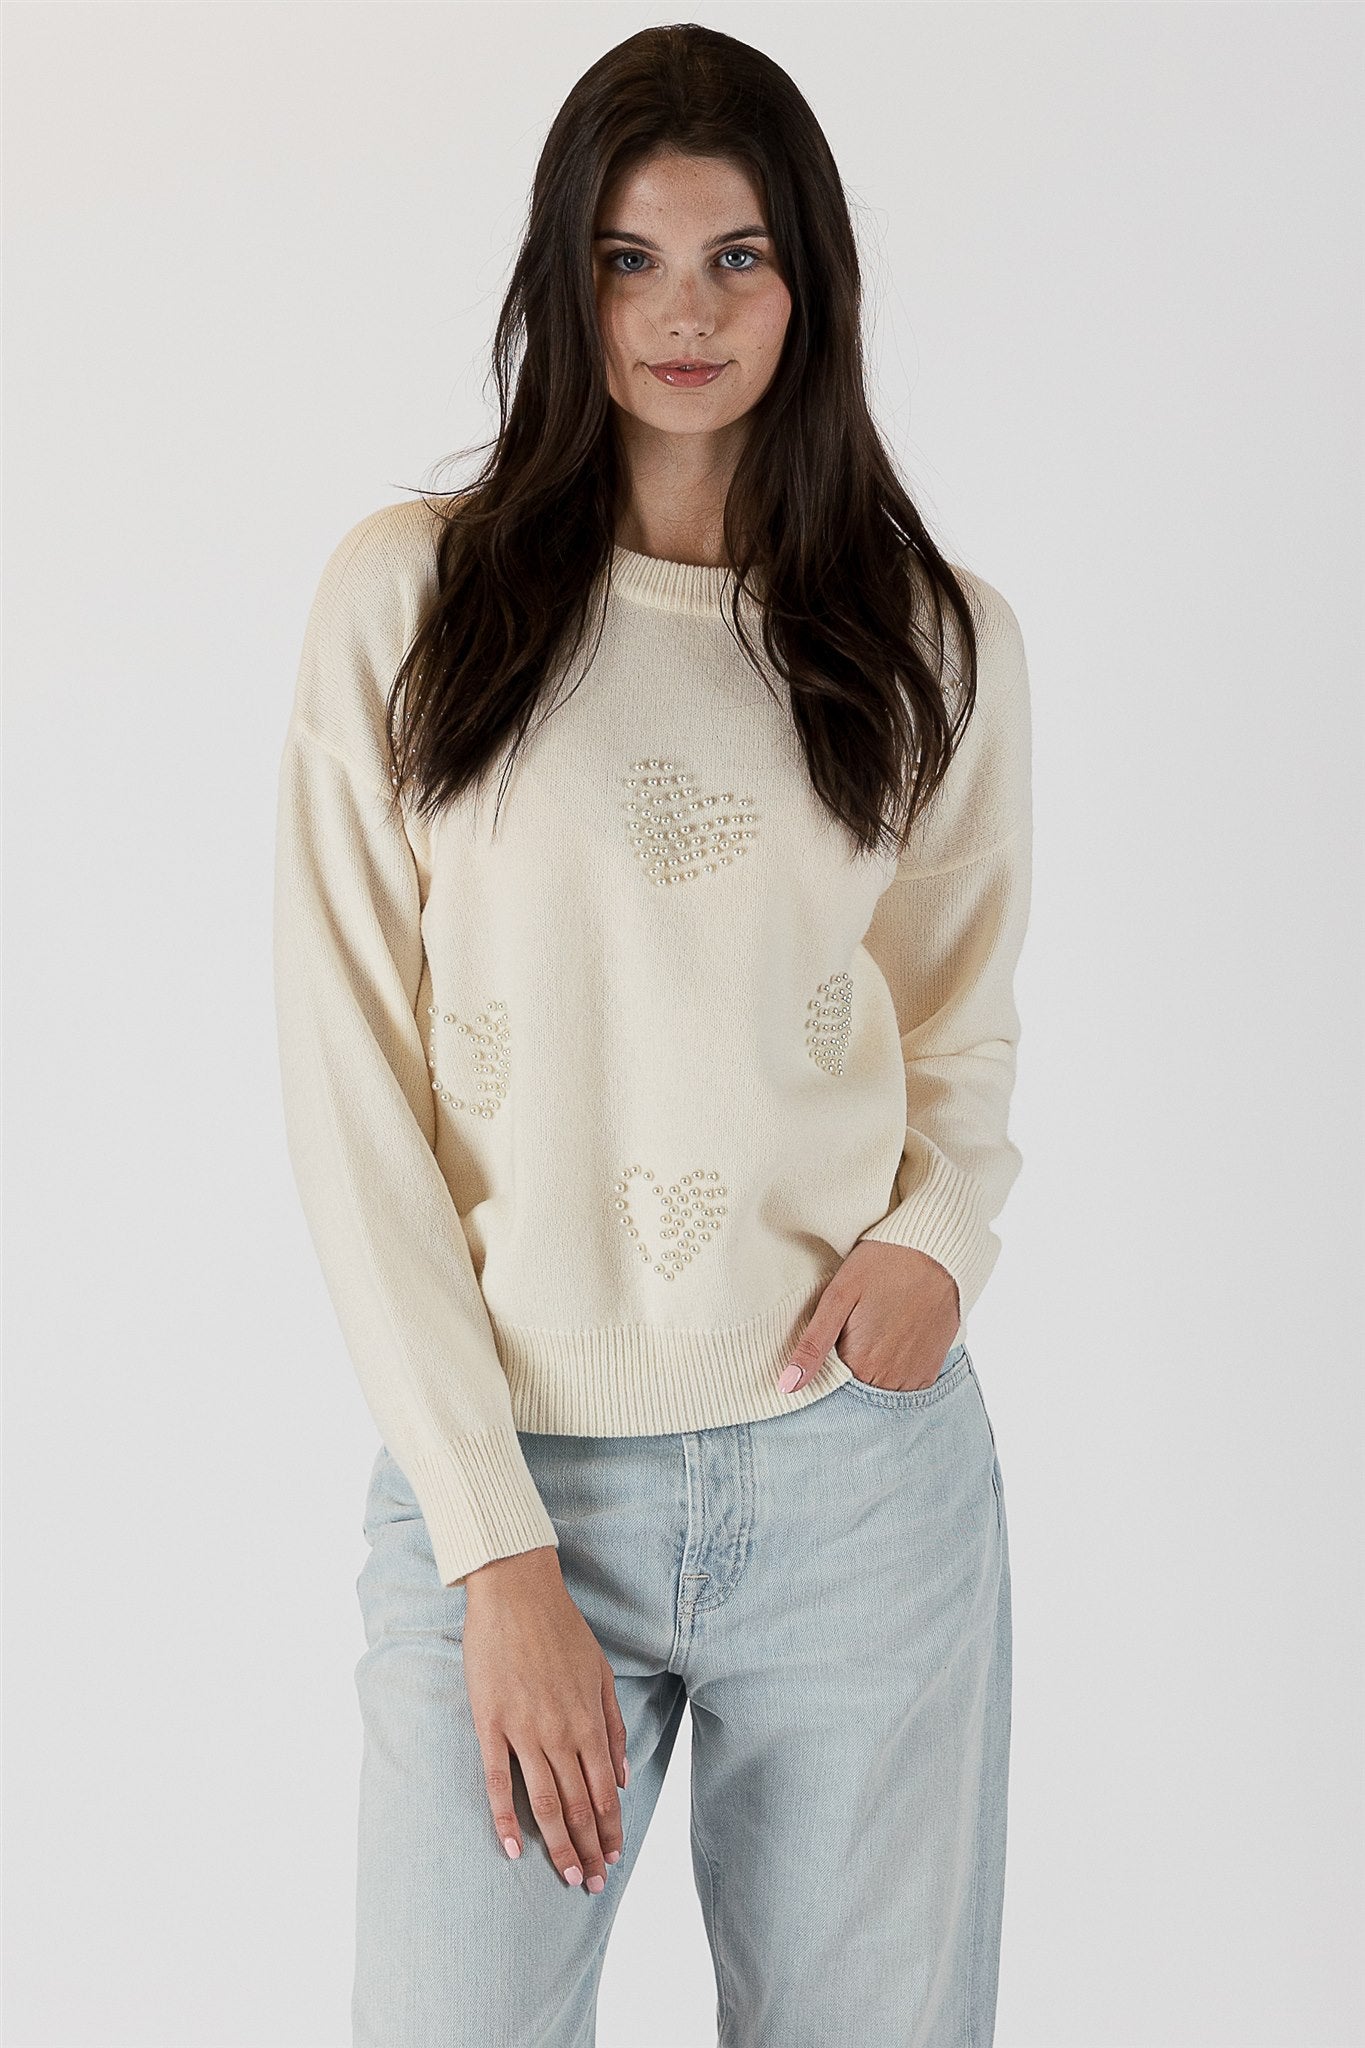 Lyla+Luxe Top - Pearl Sweater - Off White - SMALL